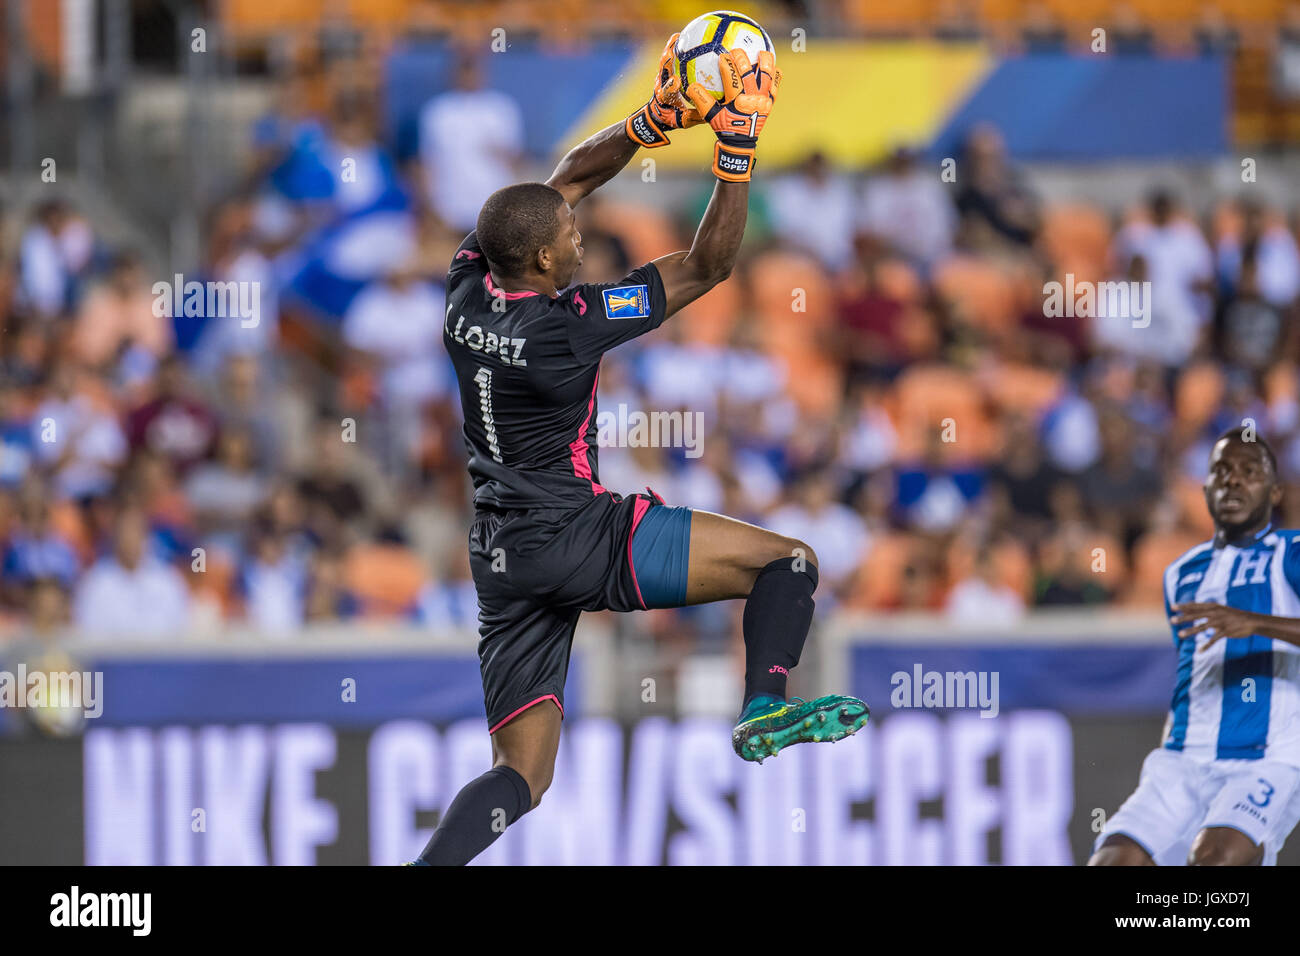 Houston, Texas, USA. 11th July, 2017. Honduras goalkeeper Luis LÃ³pez (1) grabs the ball during the 1st half of an international CONCACAF Gold Cup soccer match between Honduras and French Guiana at BBVA Compass Stadium in Houston, TX on July 11th, 2017. The game ended in a 0-0 draw. Credit: Trask Smith/ZUMA Wire/Alamy Live News Stock Photo